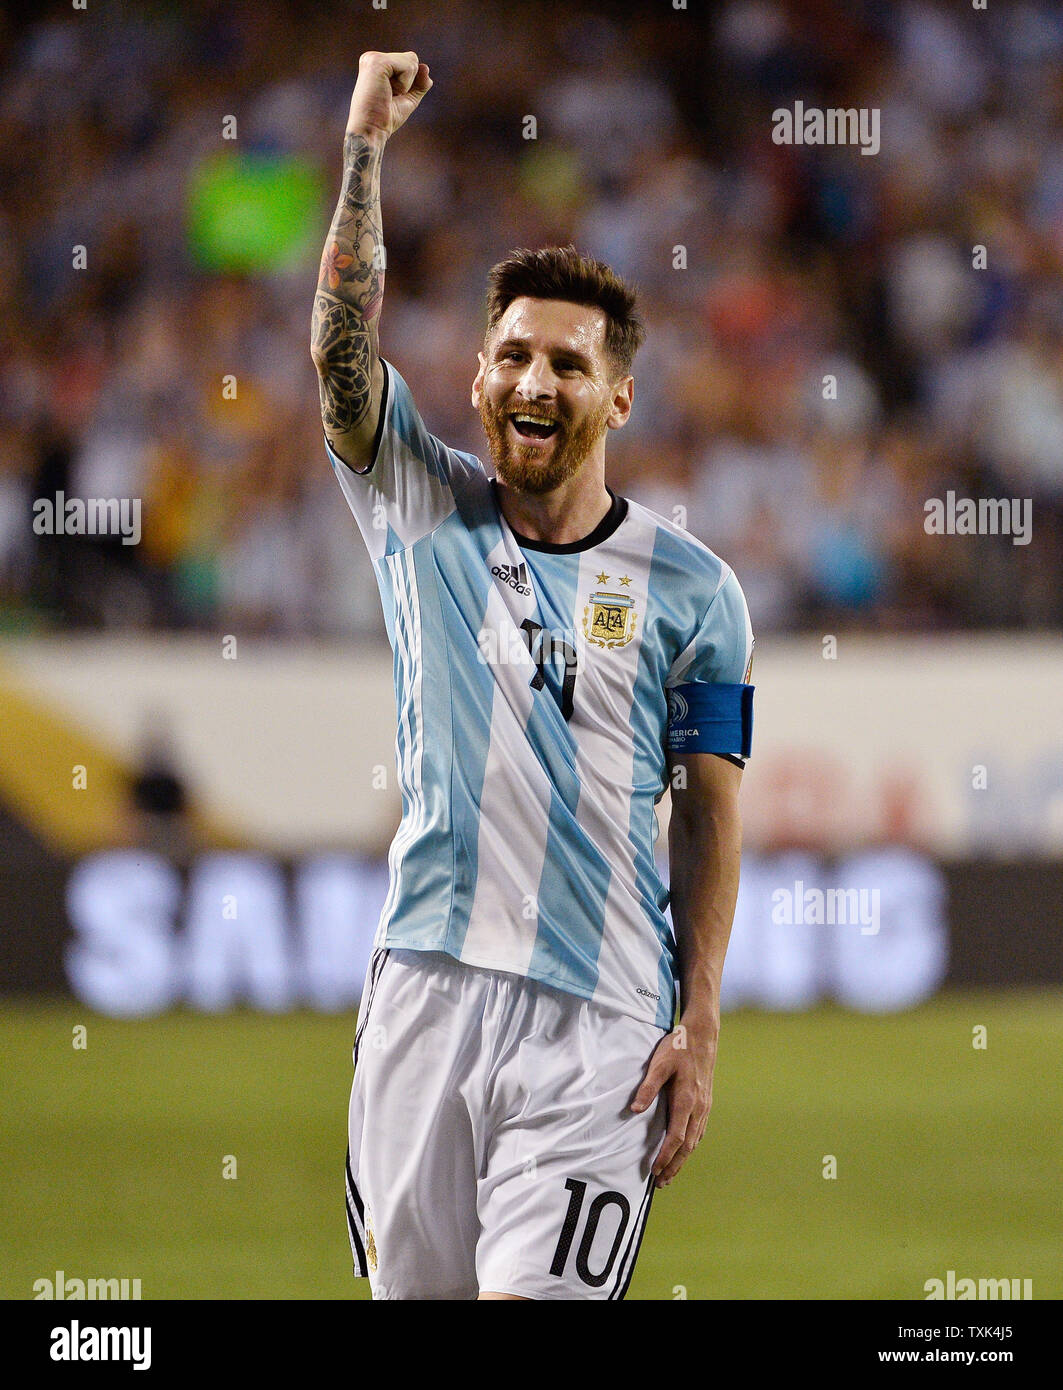 Argentina Midfielder Lionel Messi Reacts After Scoring His Second Goal Against Panama On A Free Kick During The Second Half Of A 16 Copa America Centenario Group D Match Against Panama At